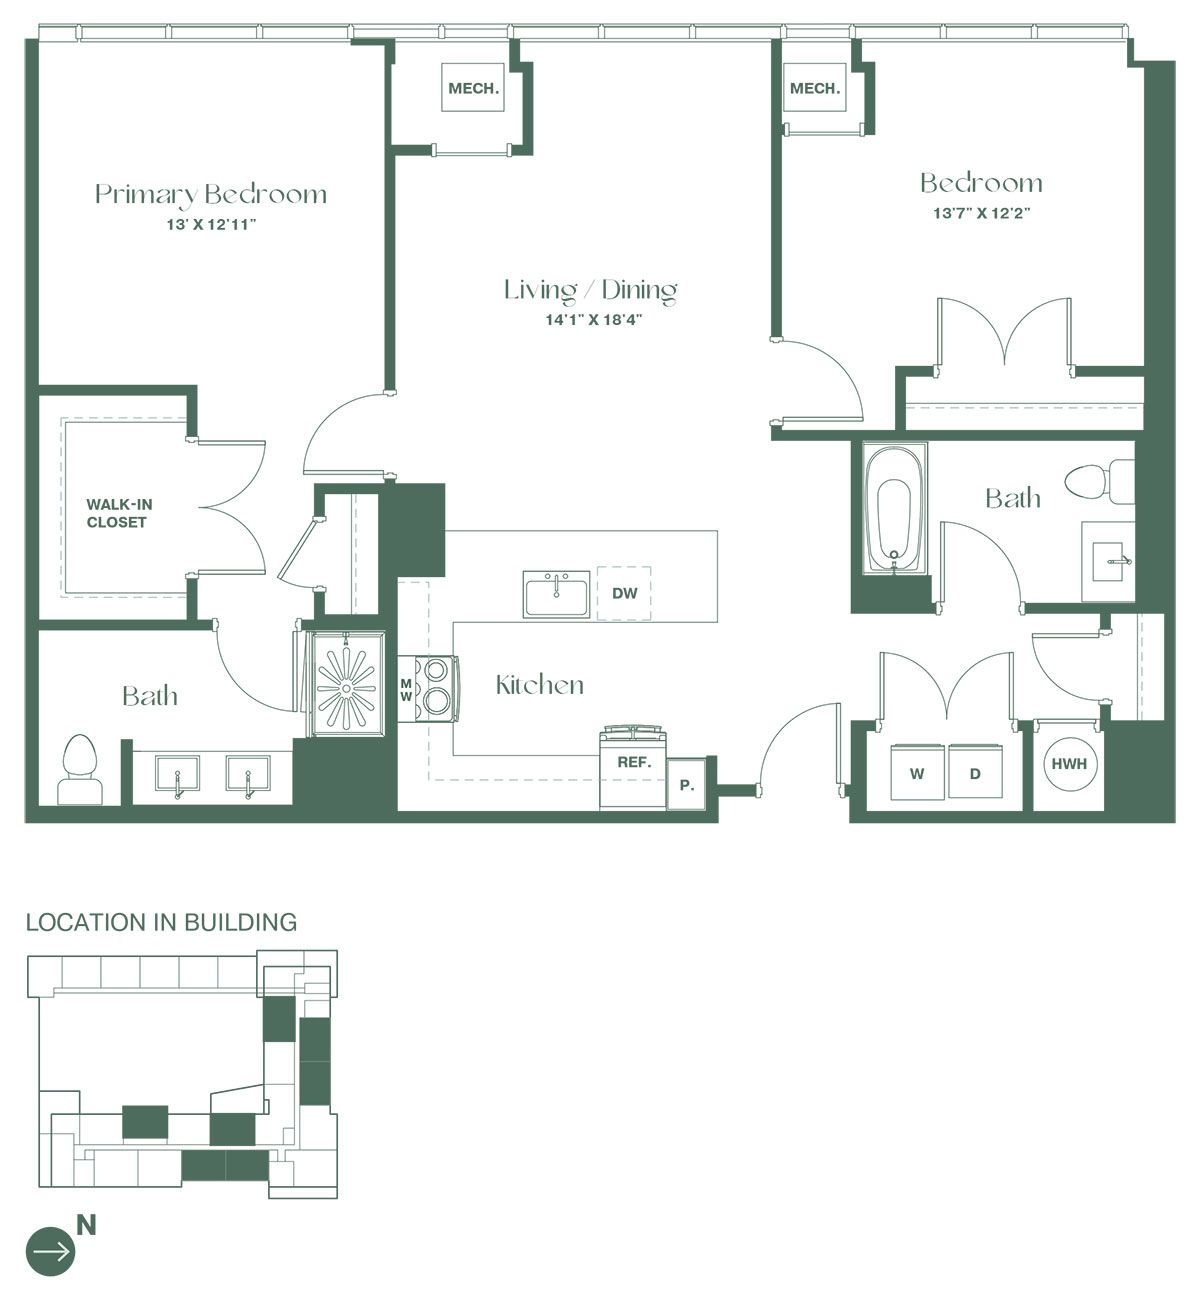 Floorplan for a two-bedroom, two-bathroom apartment at RVR at Xchange opens into a fully equipped kitchen including dishwasher and pantry. Continuing into the apartment there is a spacious living and dining room area, two bedrooms and 2 full bathrooms.